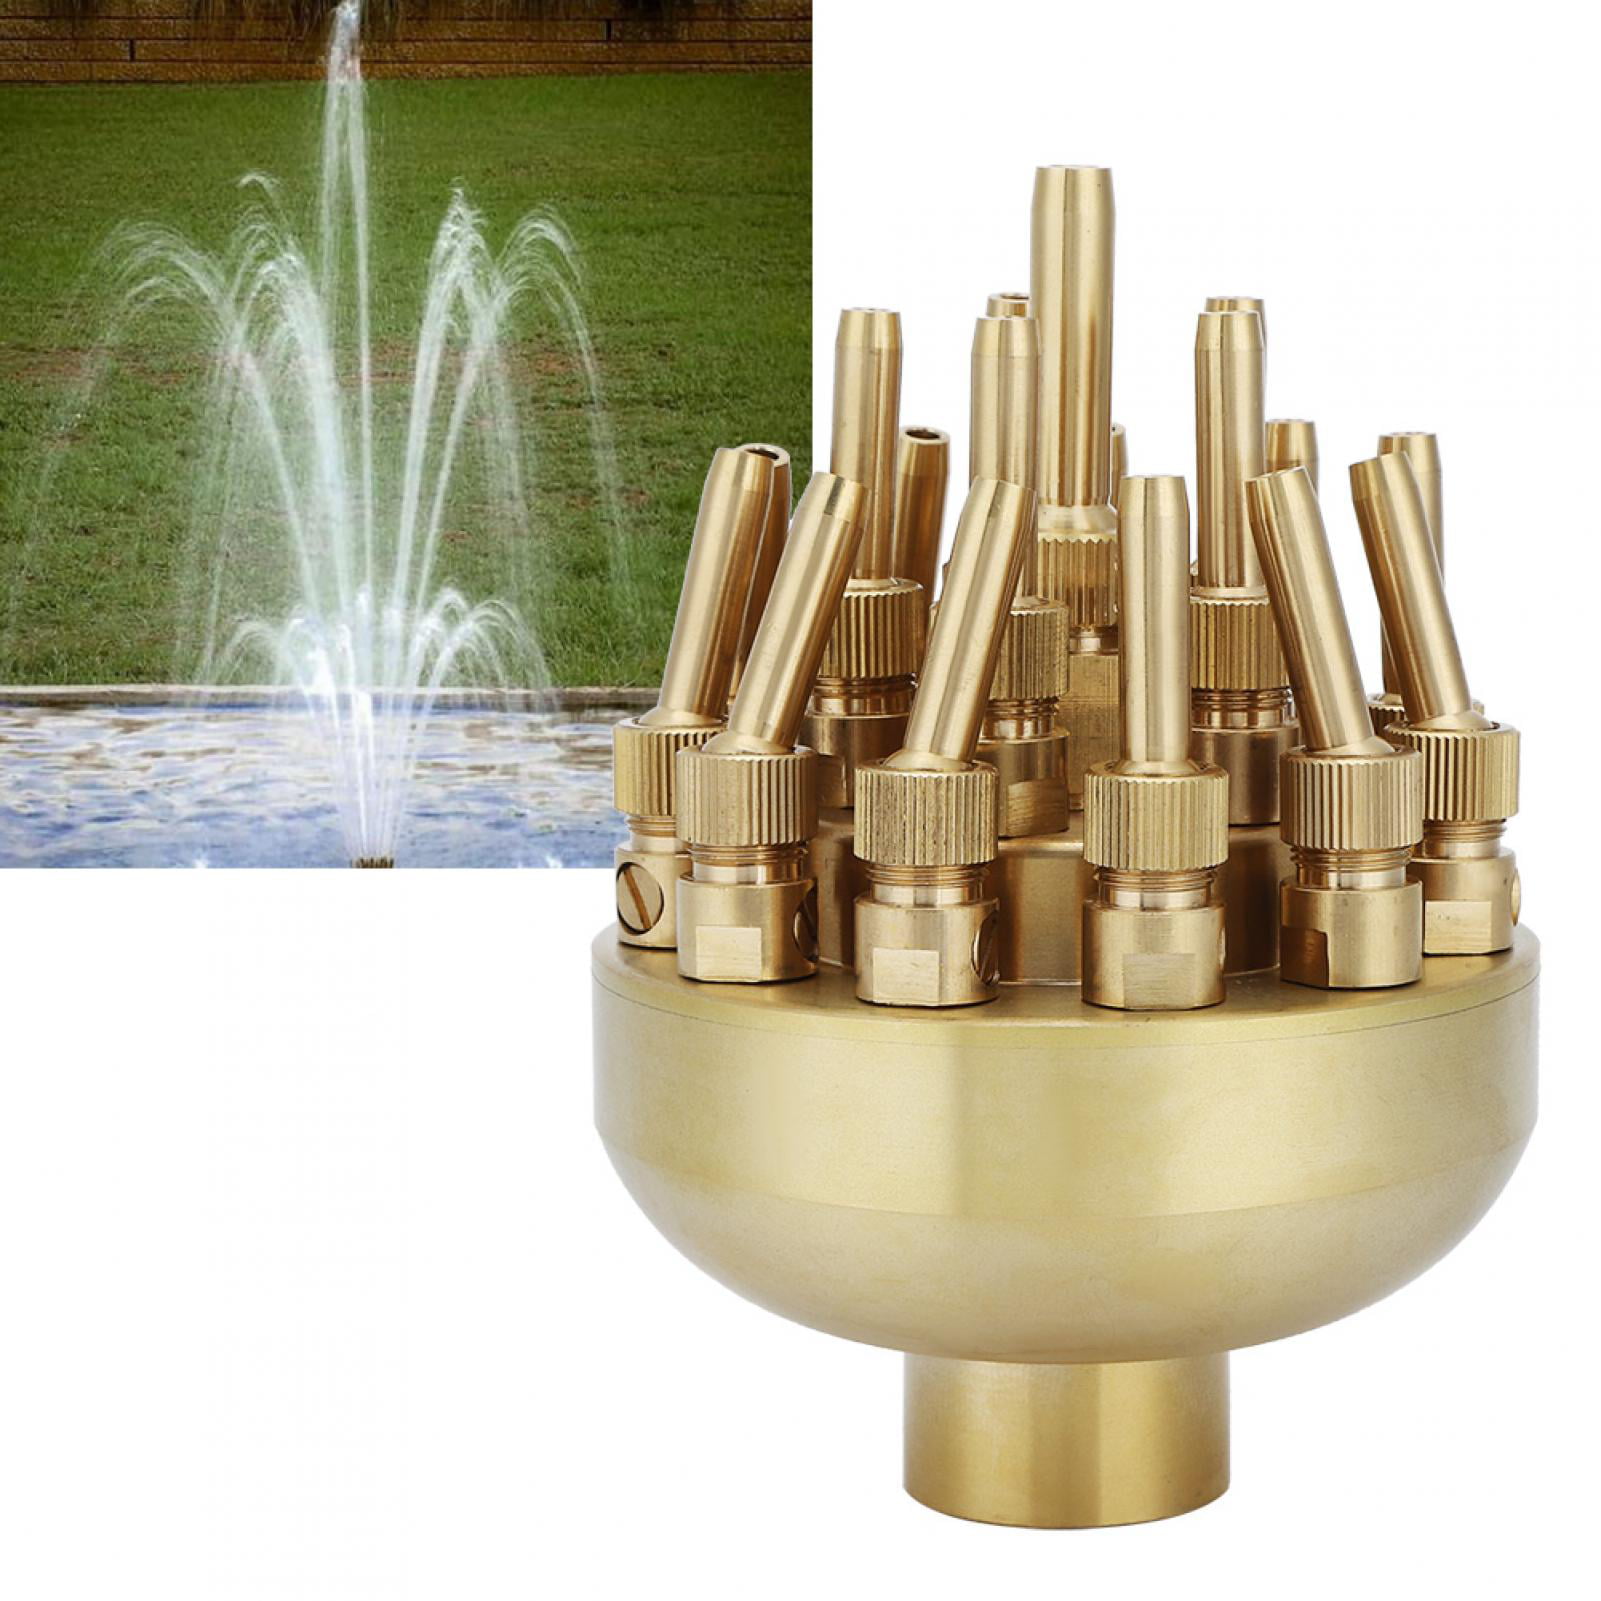 Details about   1in DN25 3 Tier Adjustable Fountain Nozzle Spray Sprinkler For Garden Pond Wa Hg 